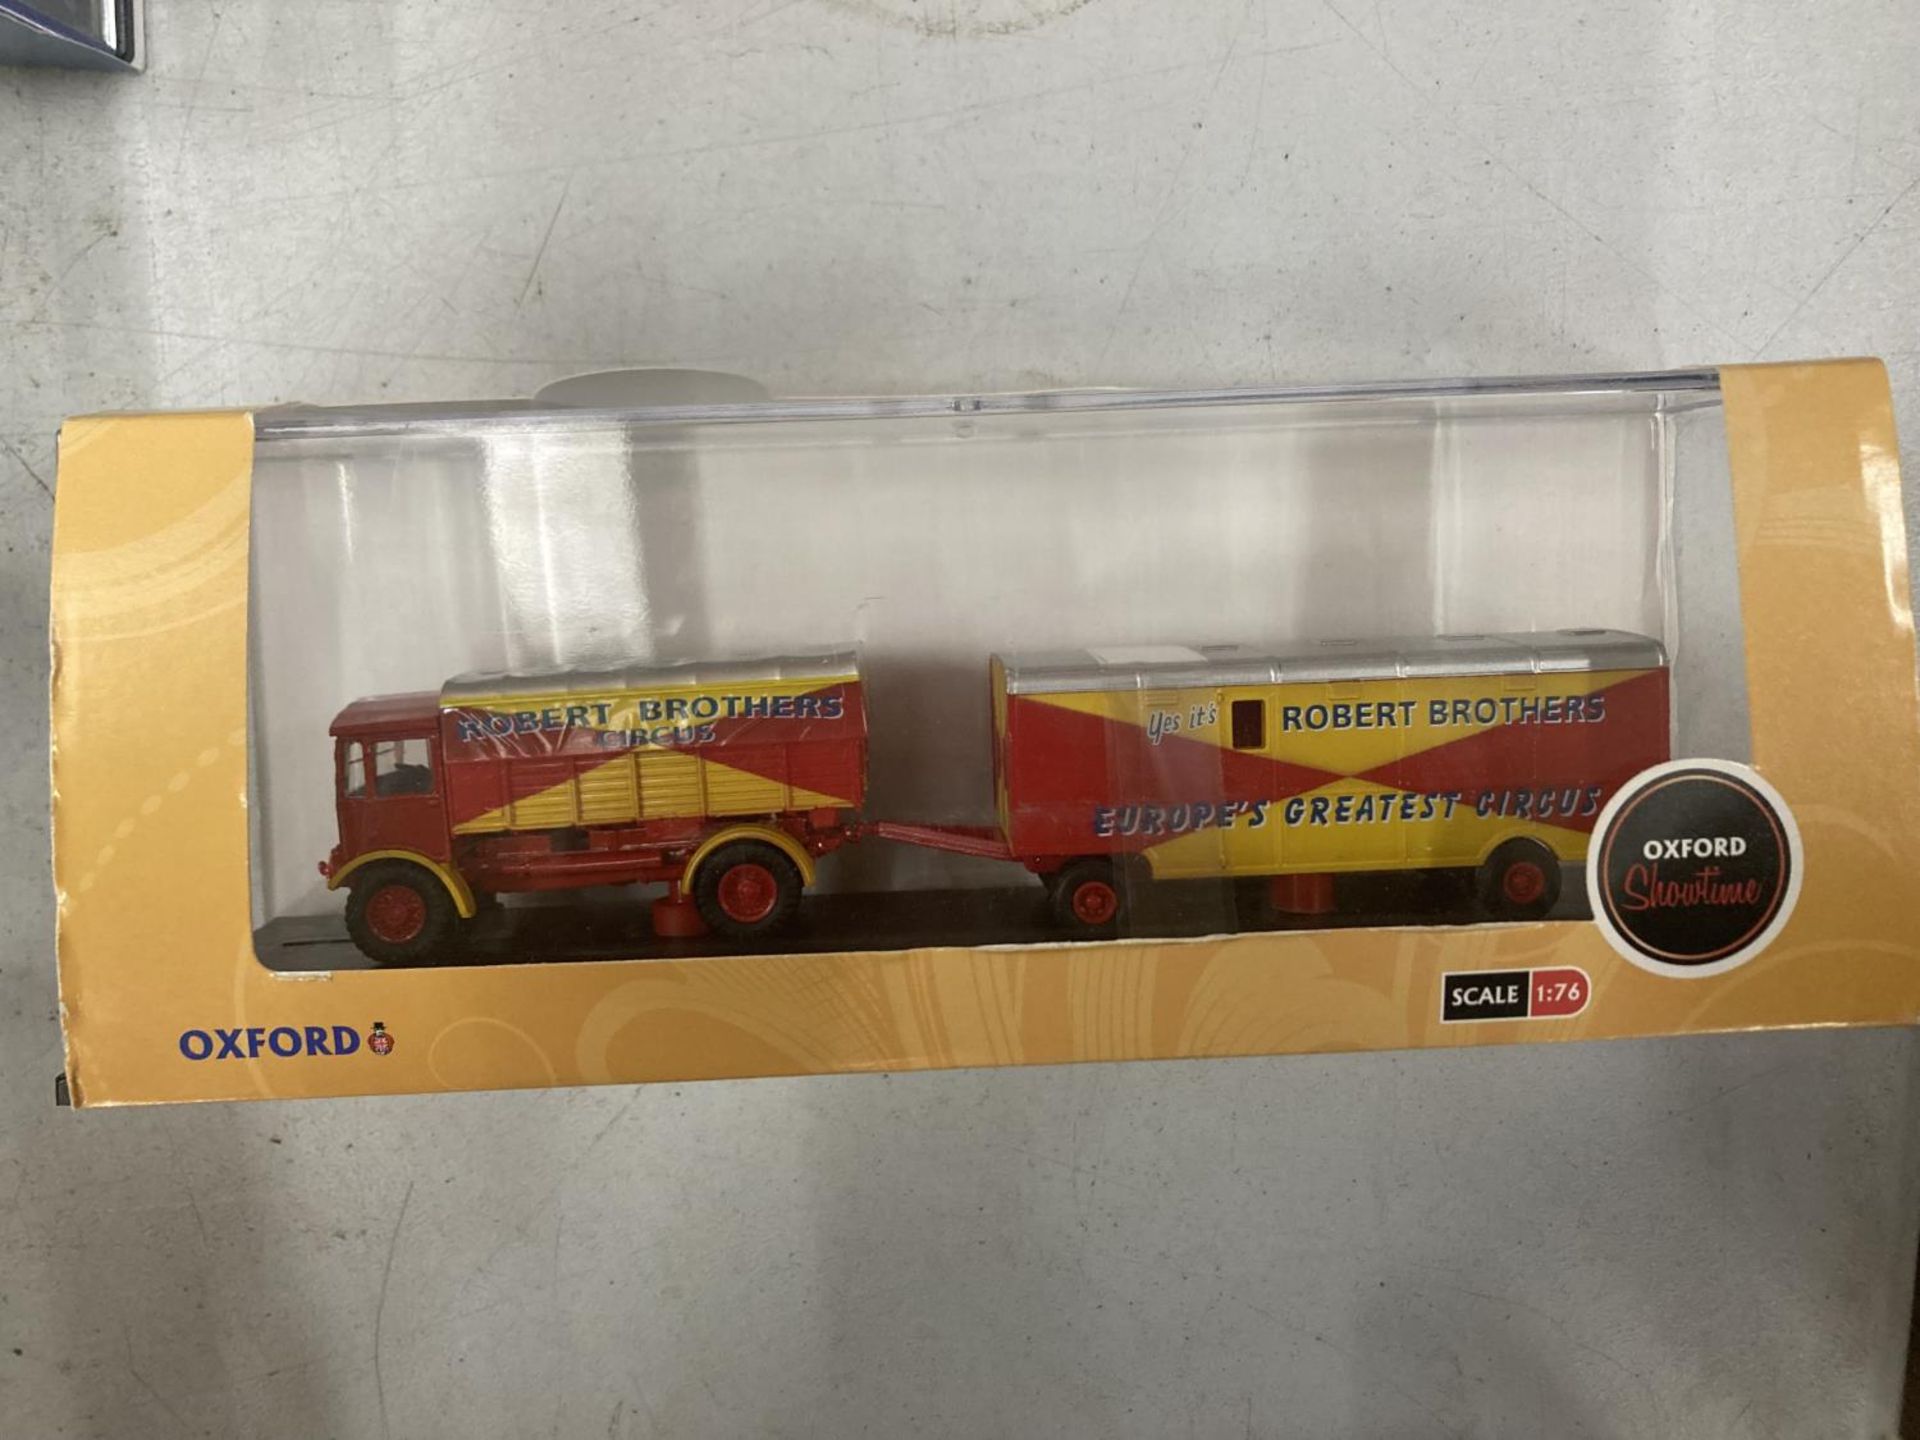 FOUR BOXED OXFORD SHOWTIME VEHICLES TO INCLUDE BILLY SMARTS CIRCUS AND ROBERT BROTHERS CIRCUS - Image 4 of 5